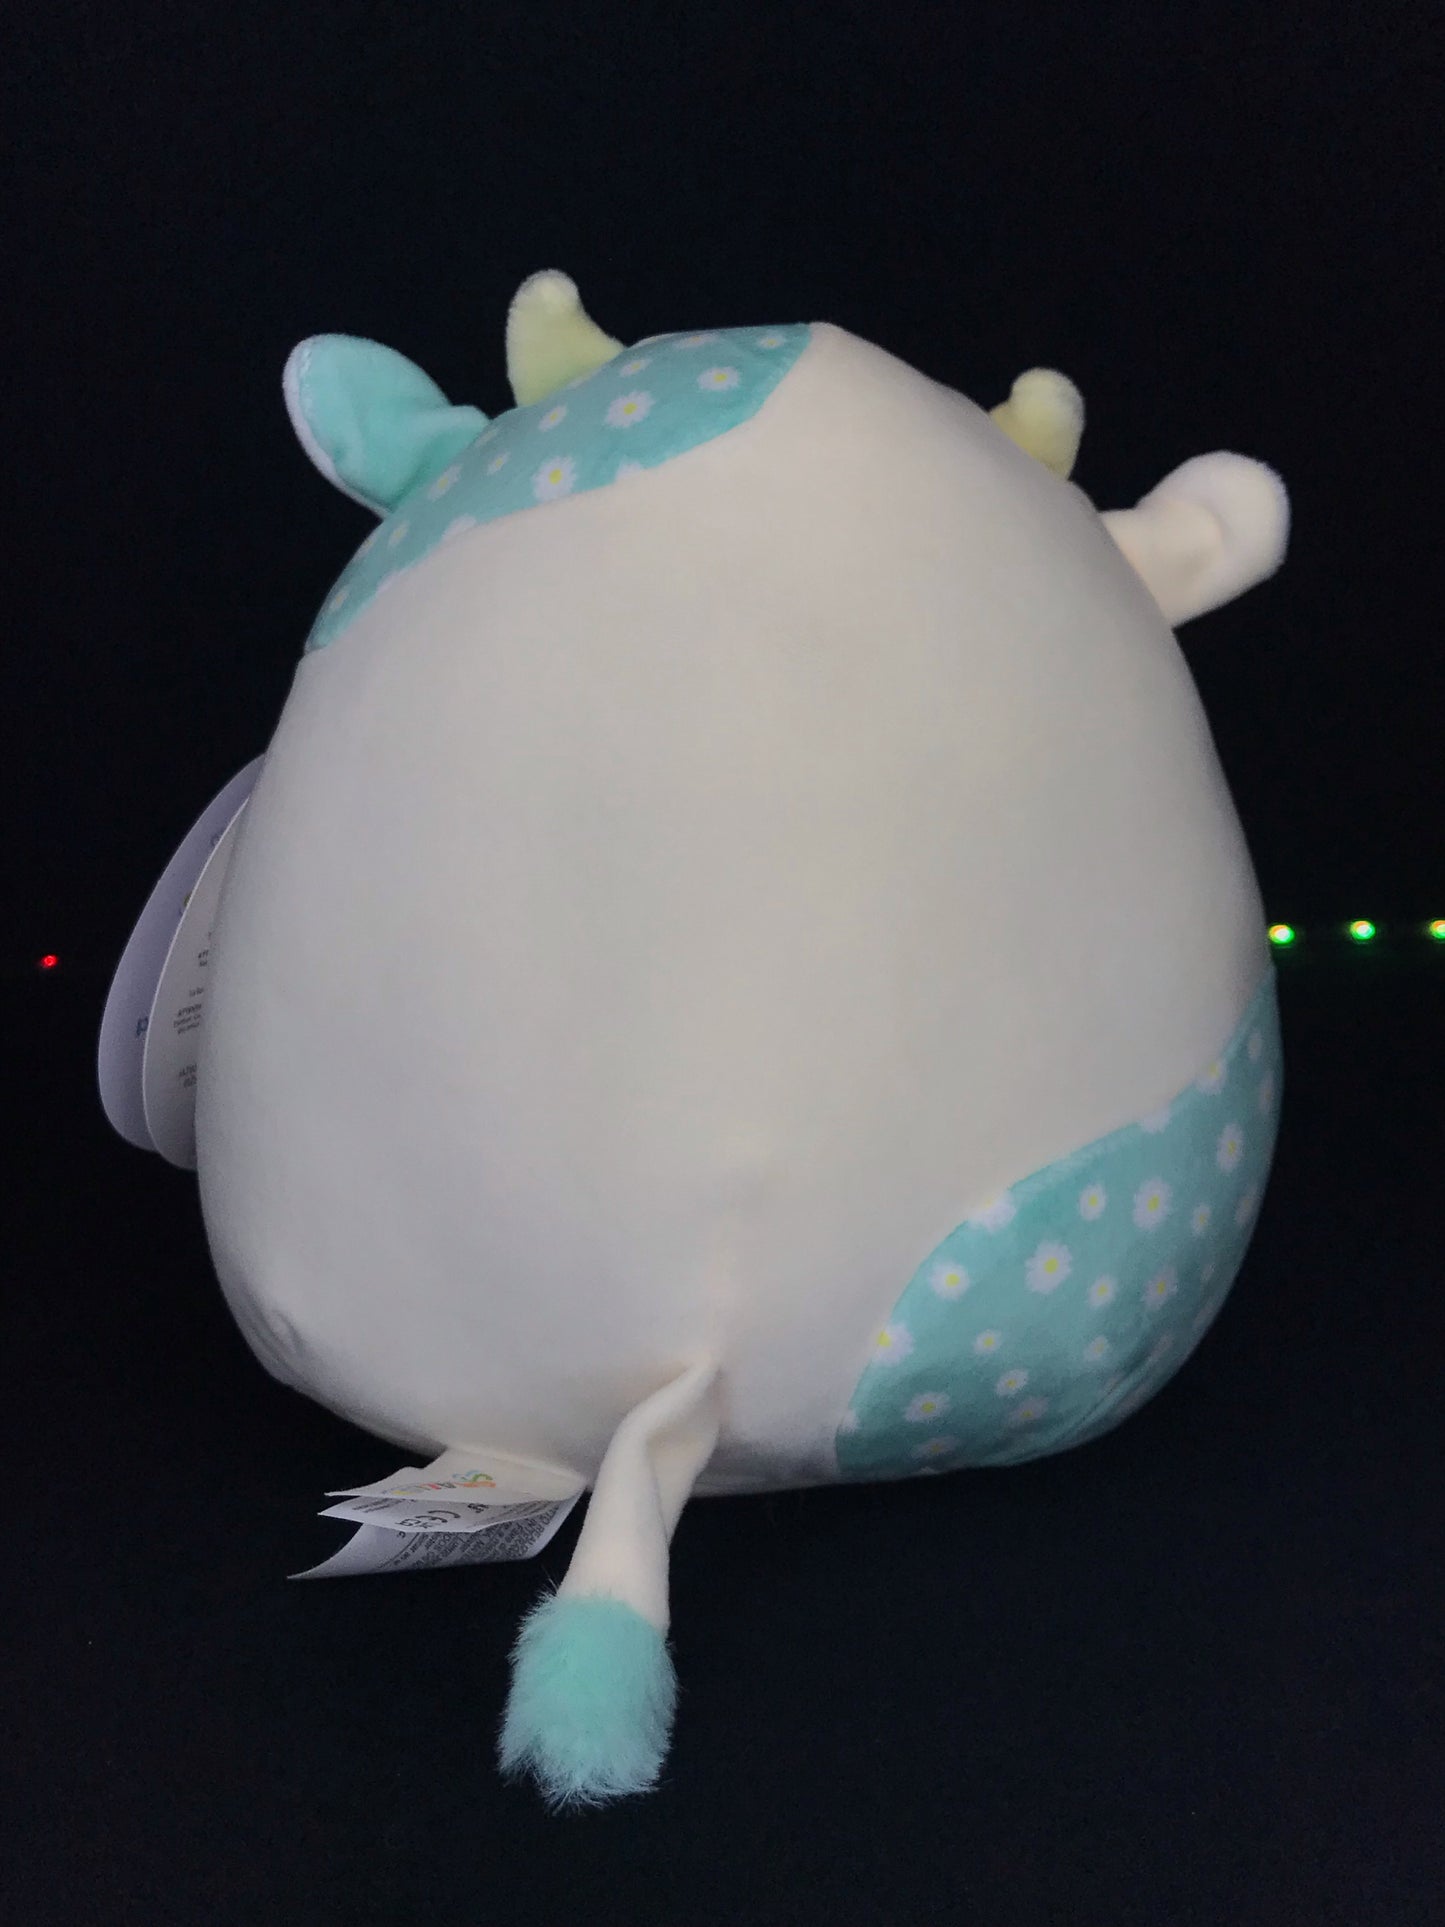 Squishmallow 8” Belana the Spring Cow